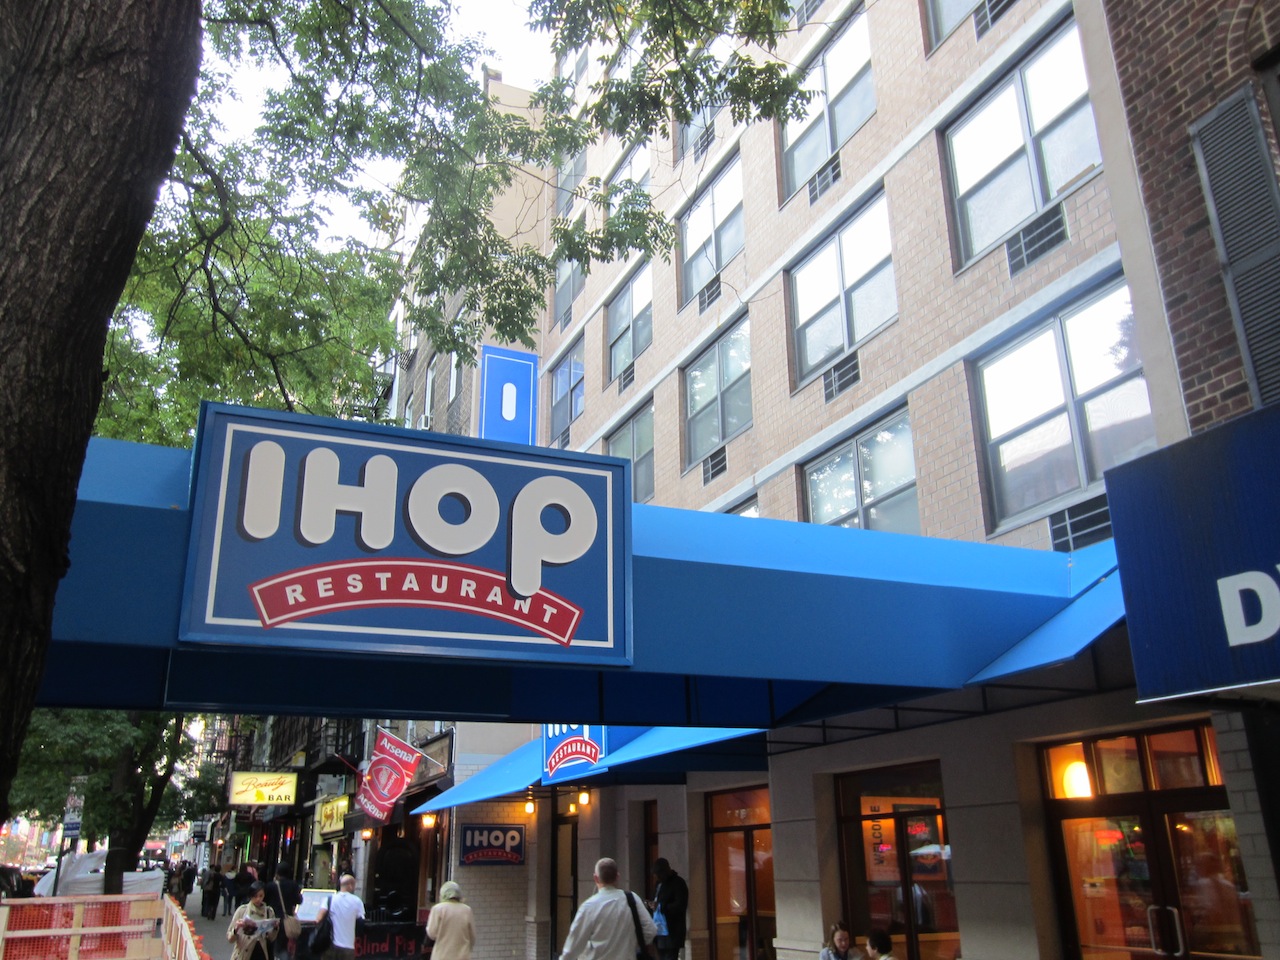 EV Grieve: Life behind IHOP: 'My apartment now smells like the